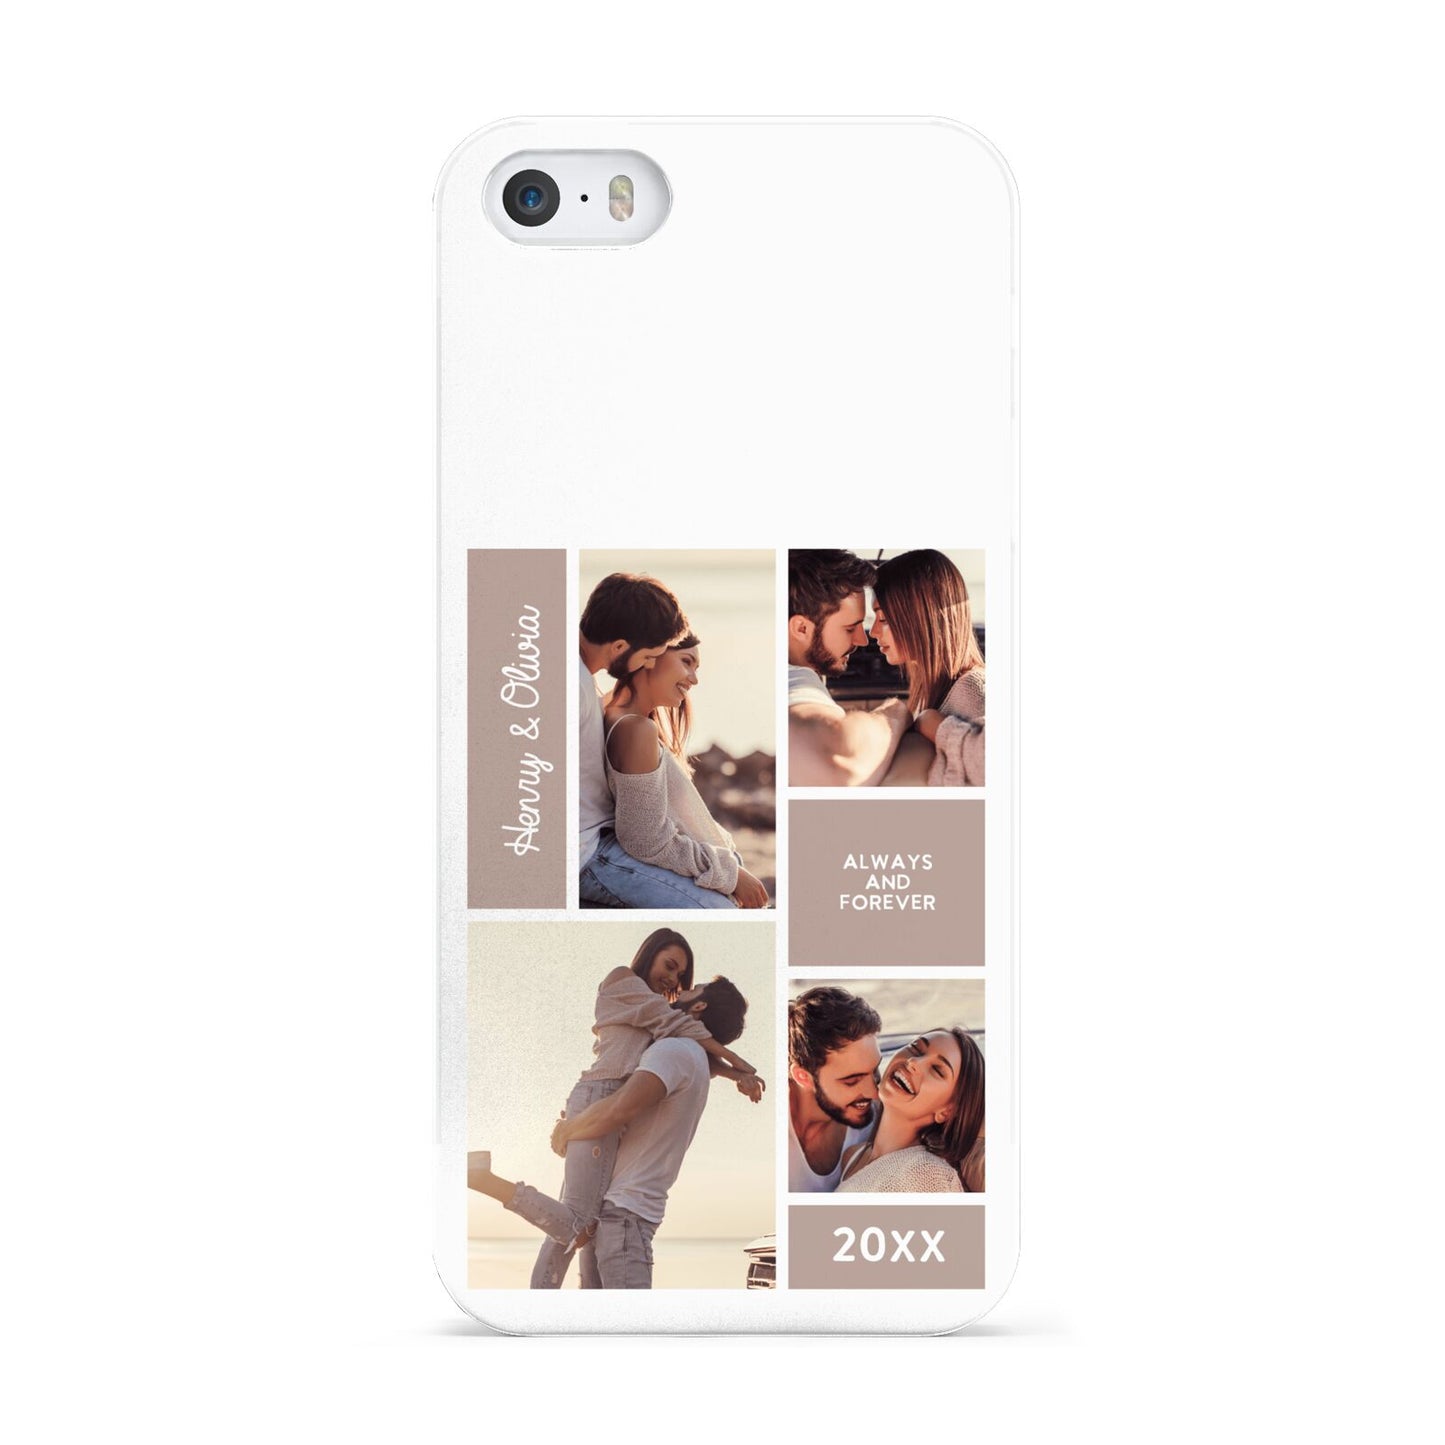 Couples Valentine Photo Collage Personalised Apple iPhone 5 Case